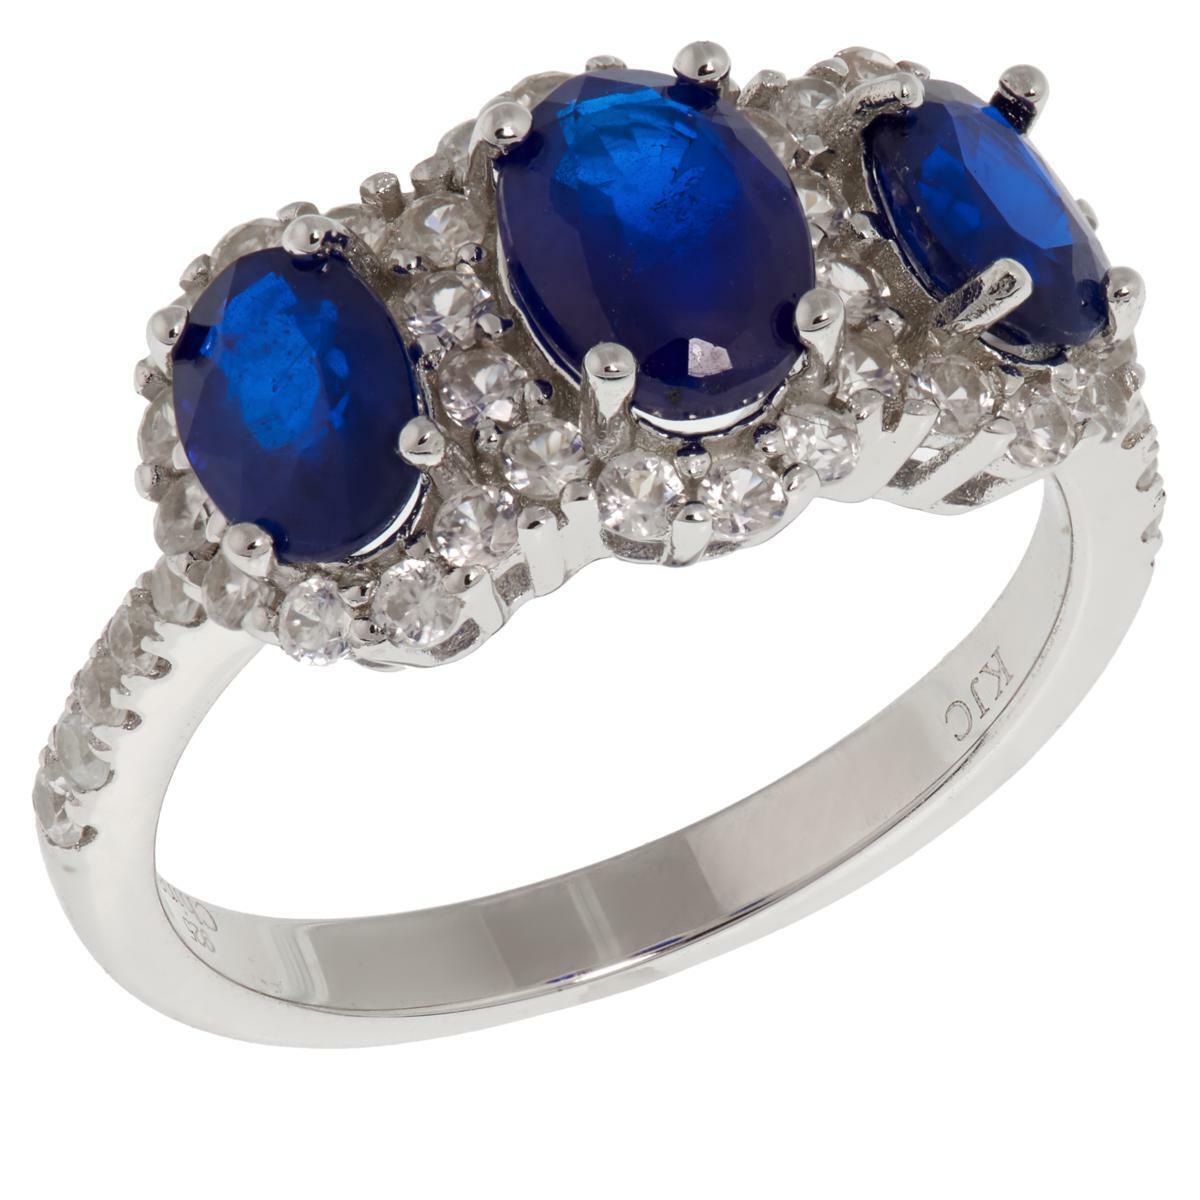 Colleen Lopez 1.53Ctw Blue Spinel And White Zircon 3-Stone Ring Size 8 Hsn $200